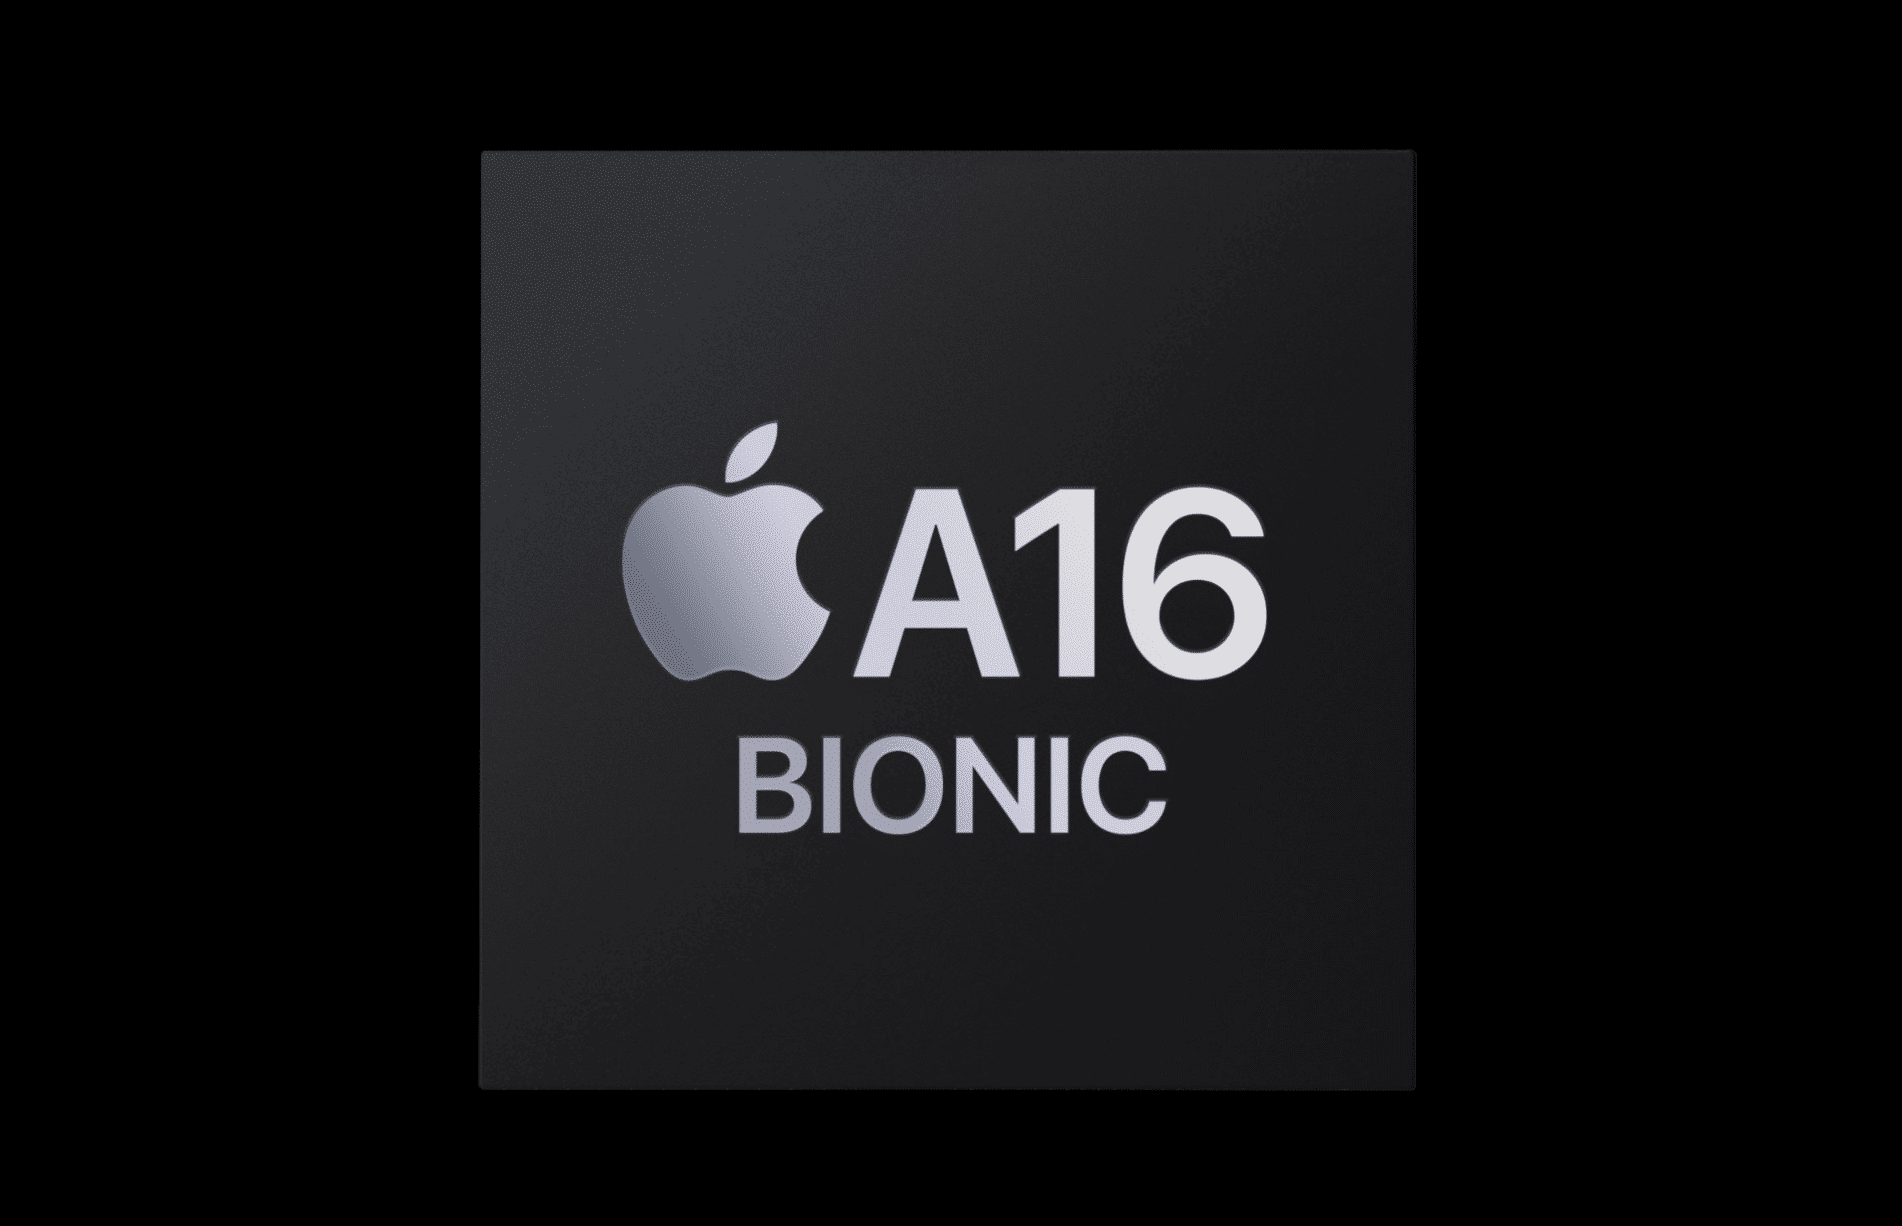 Performance of iPhone 15 A16 Bionic Chip